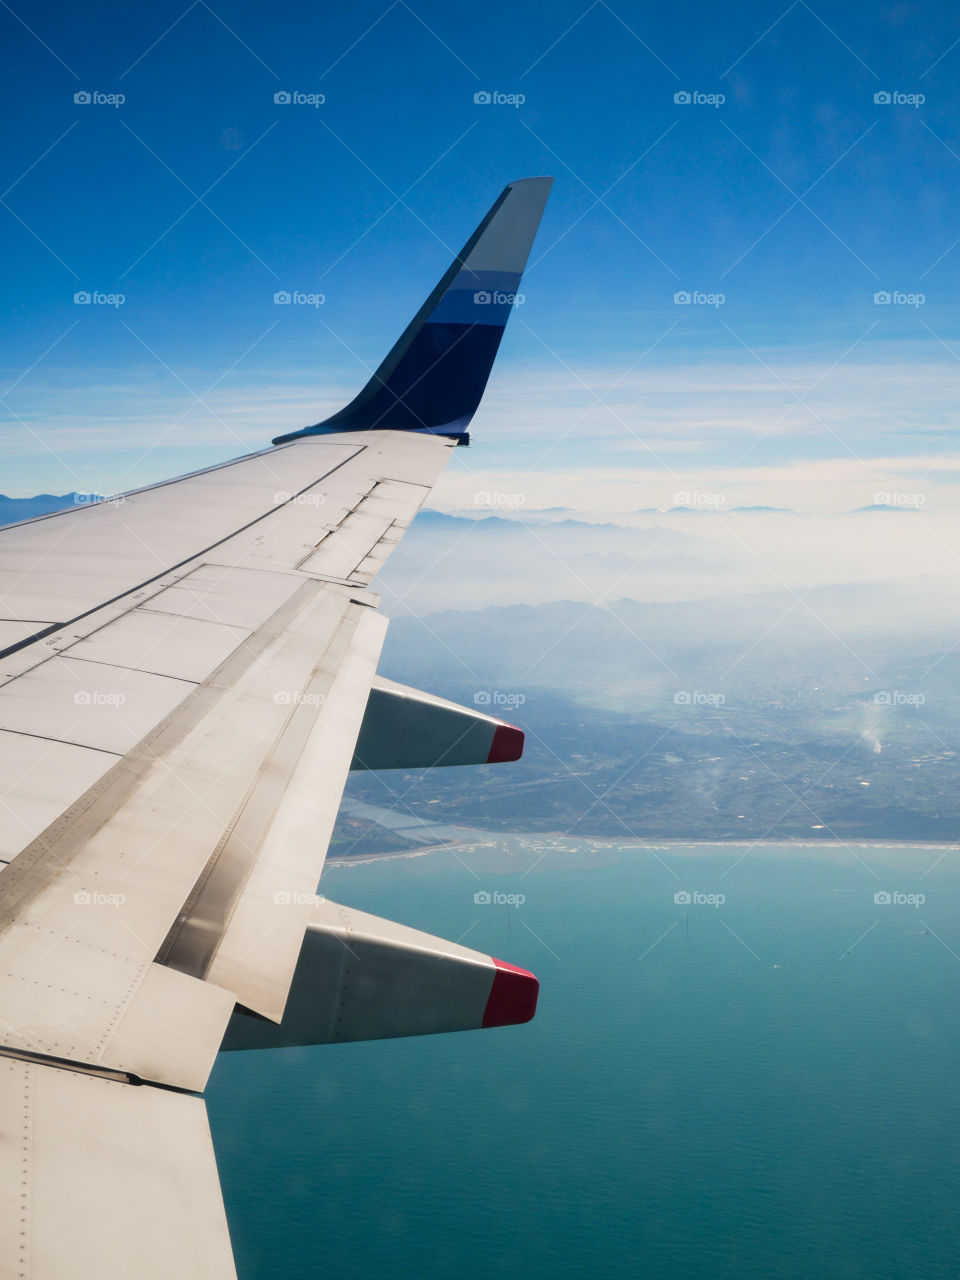 A day shot of a plane wing flying over the ocean a city and mountains. Nice contrasting blue colors all over